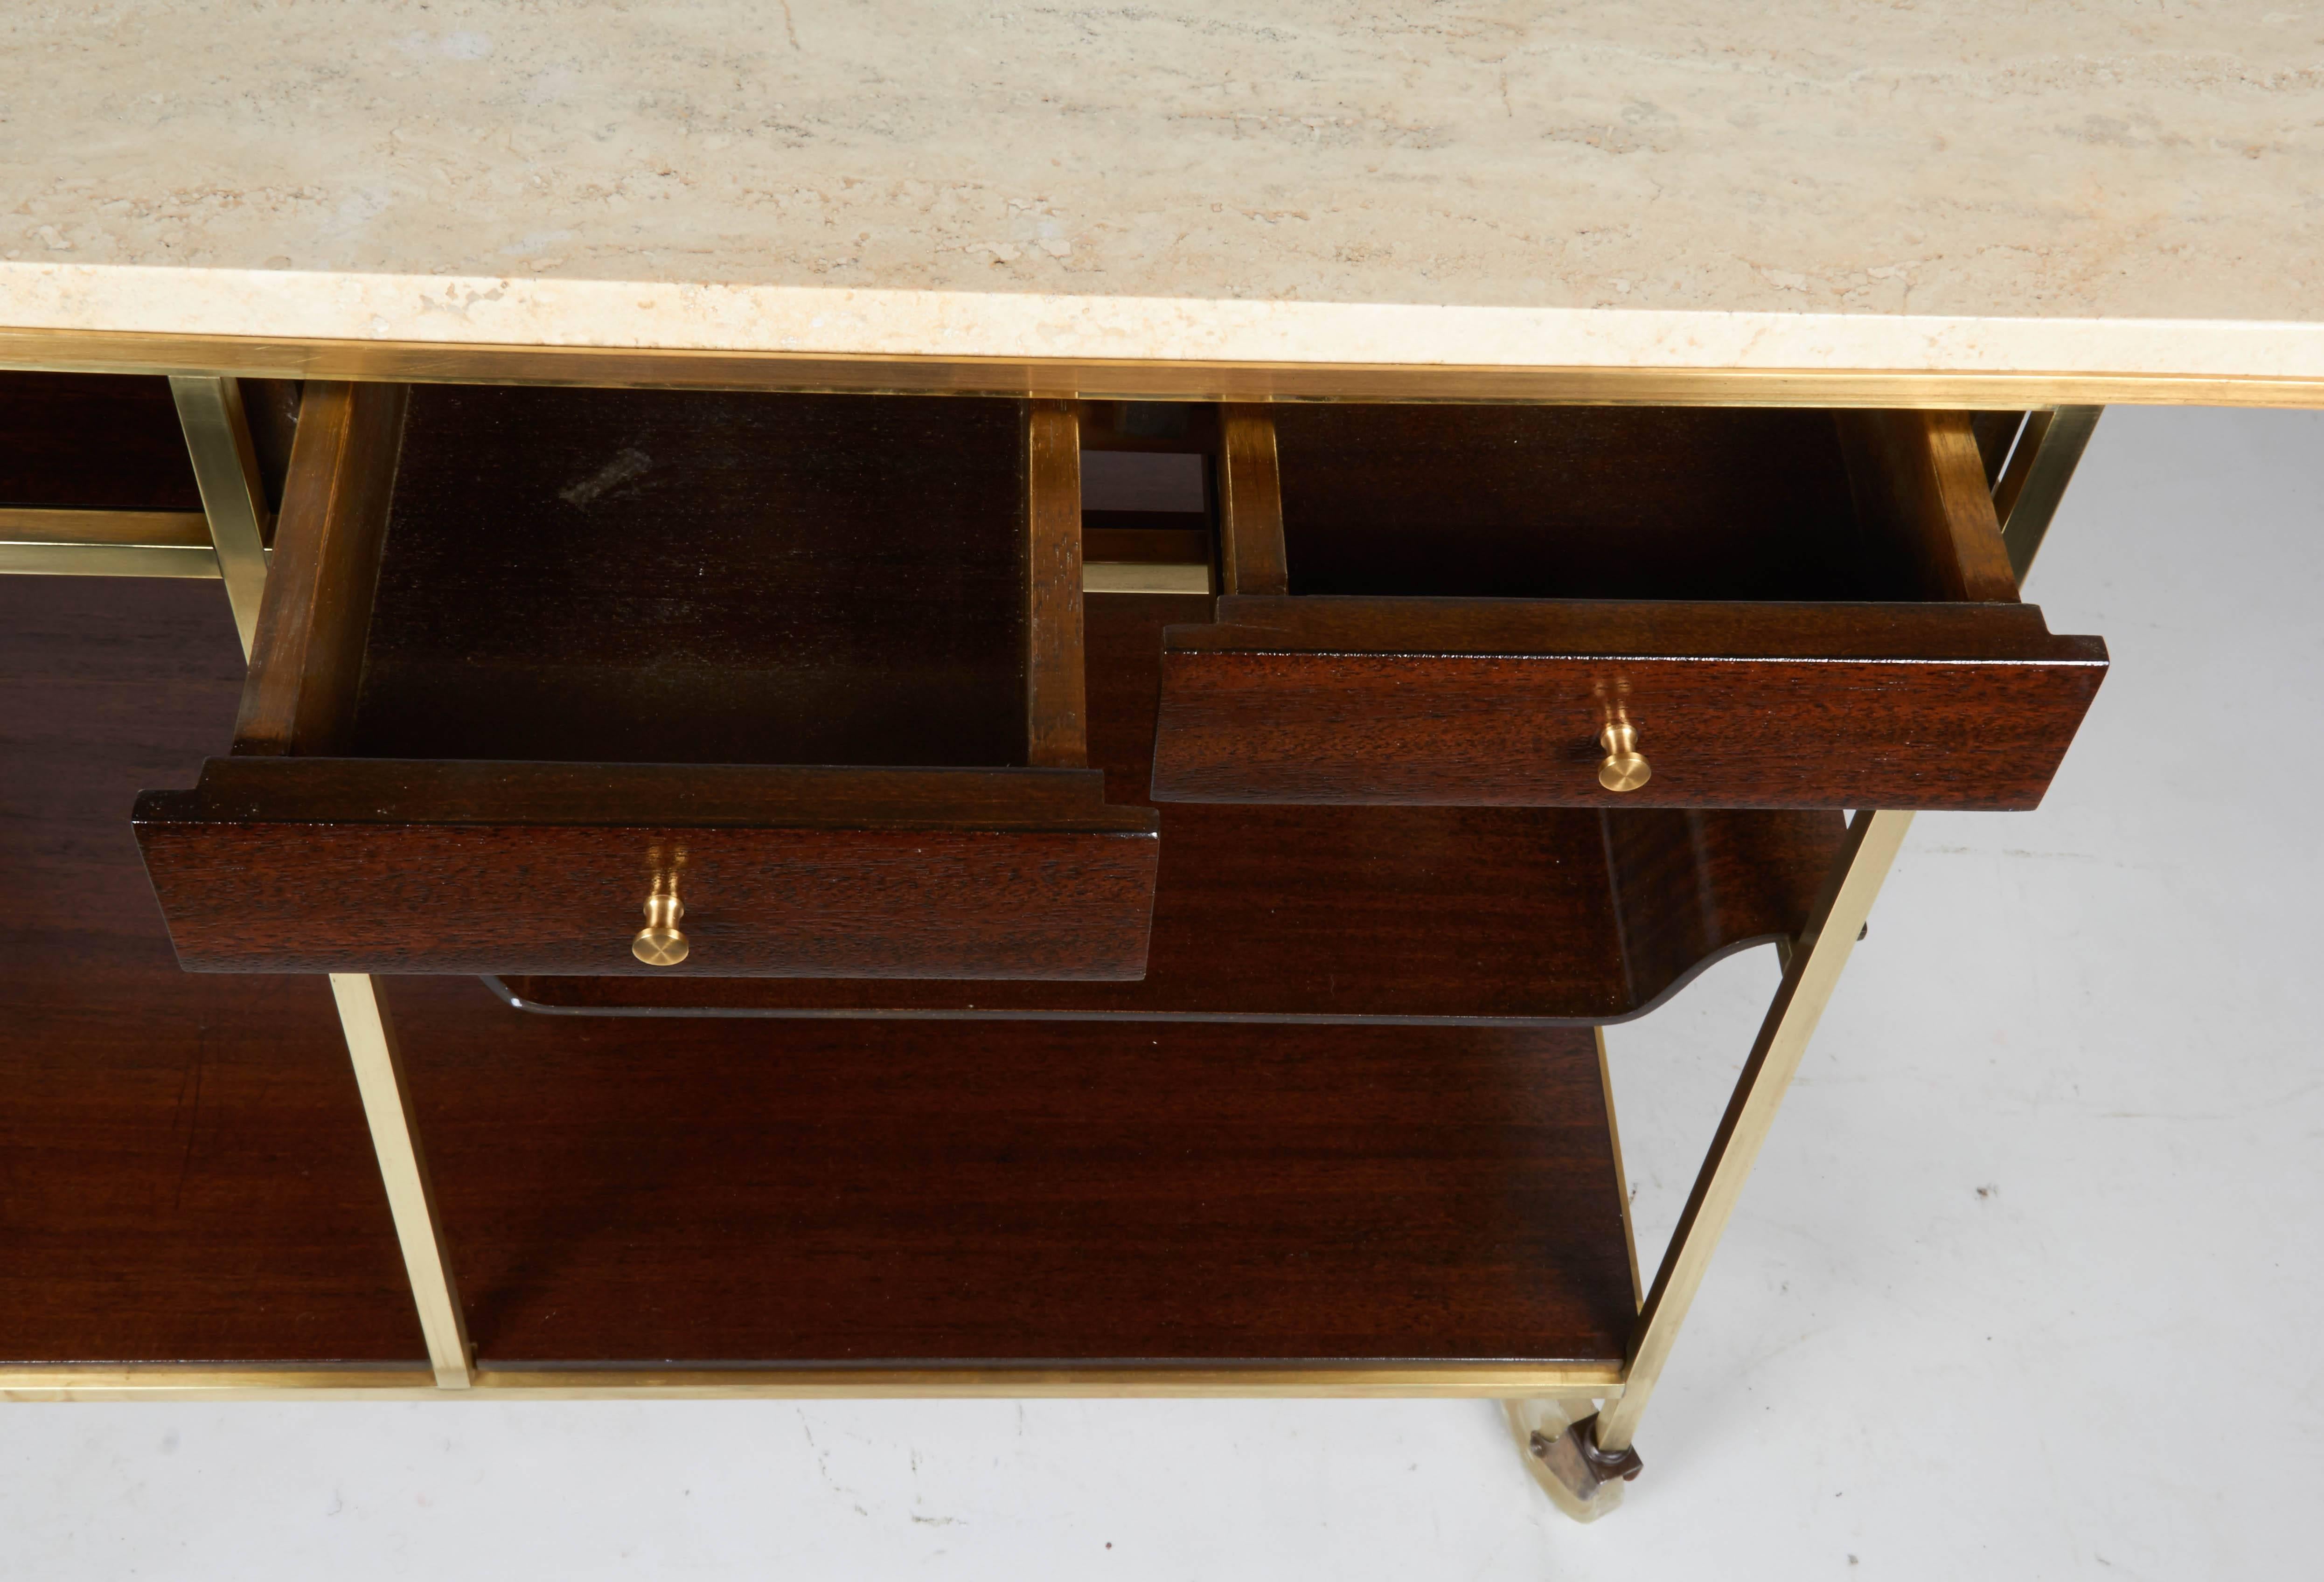 20th Century Bar or Serving Cart by Paul McCobb for Calvin